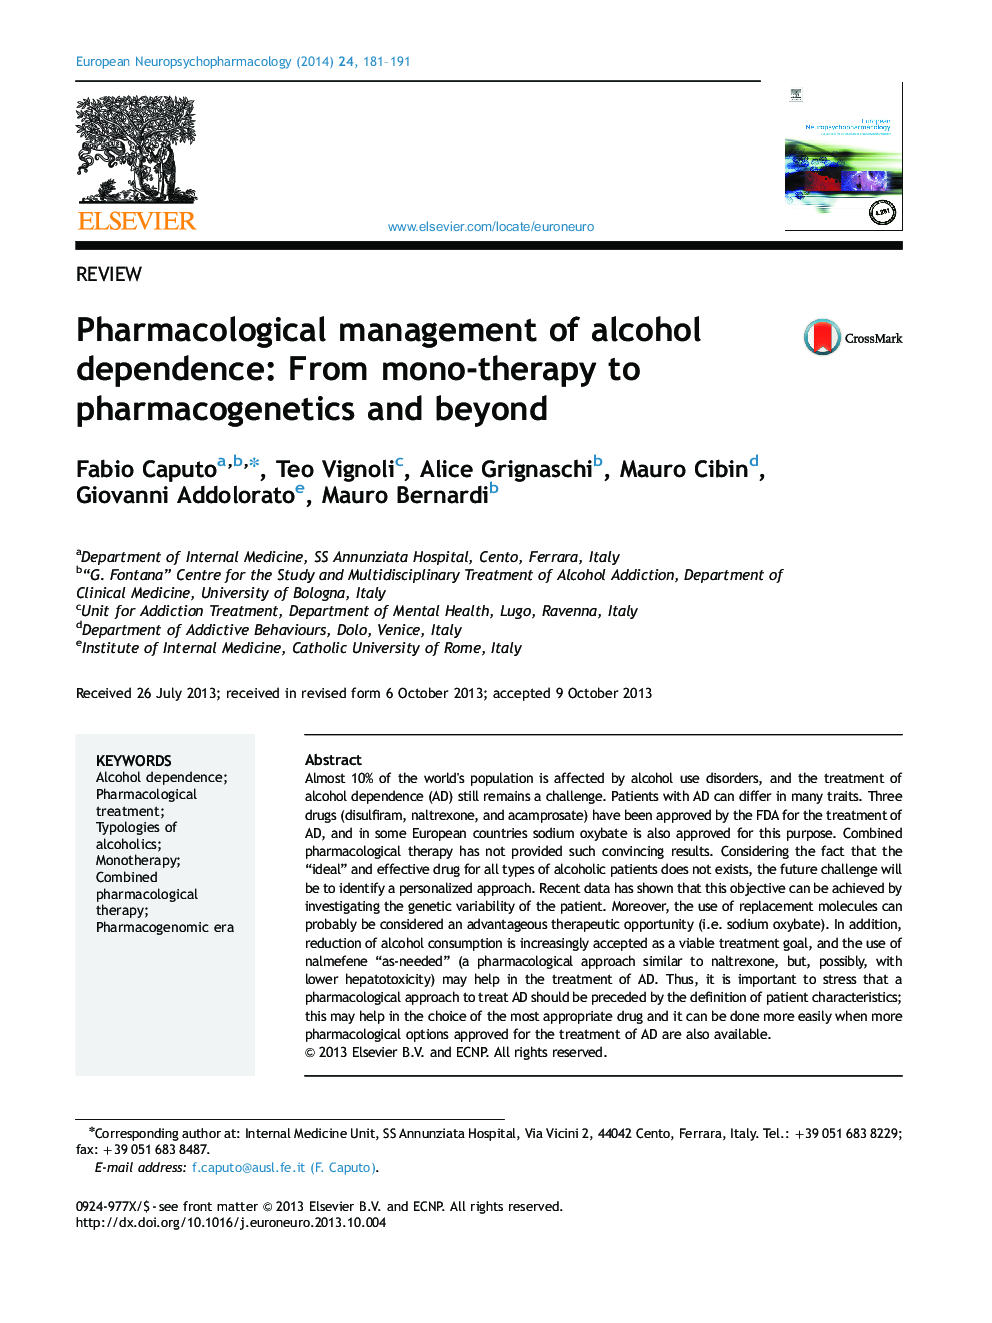 Pharmacological management of alcohol dependence: From mono-therapy to pharmacogenetics and beyond